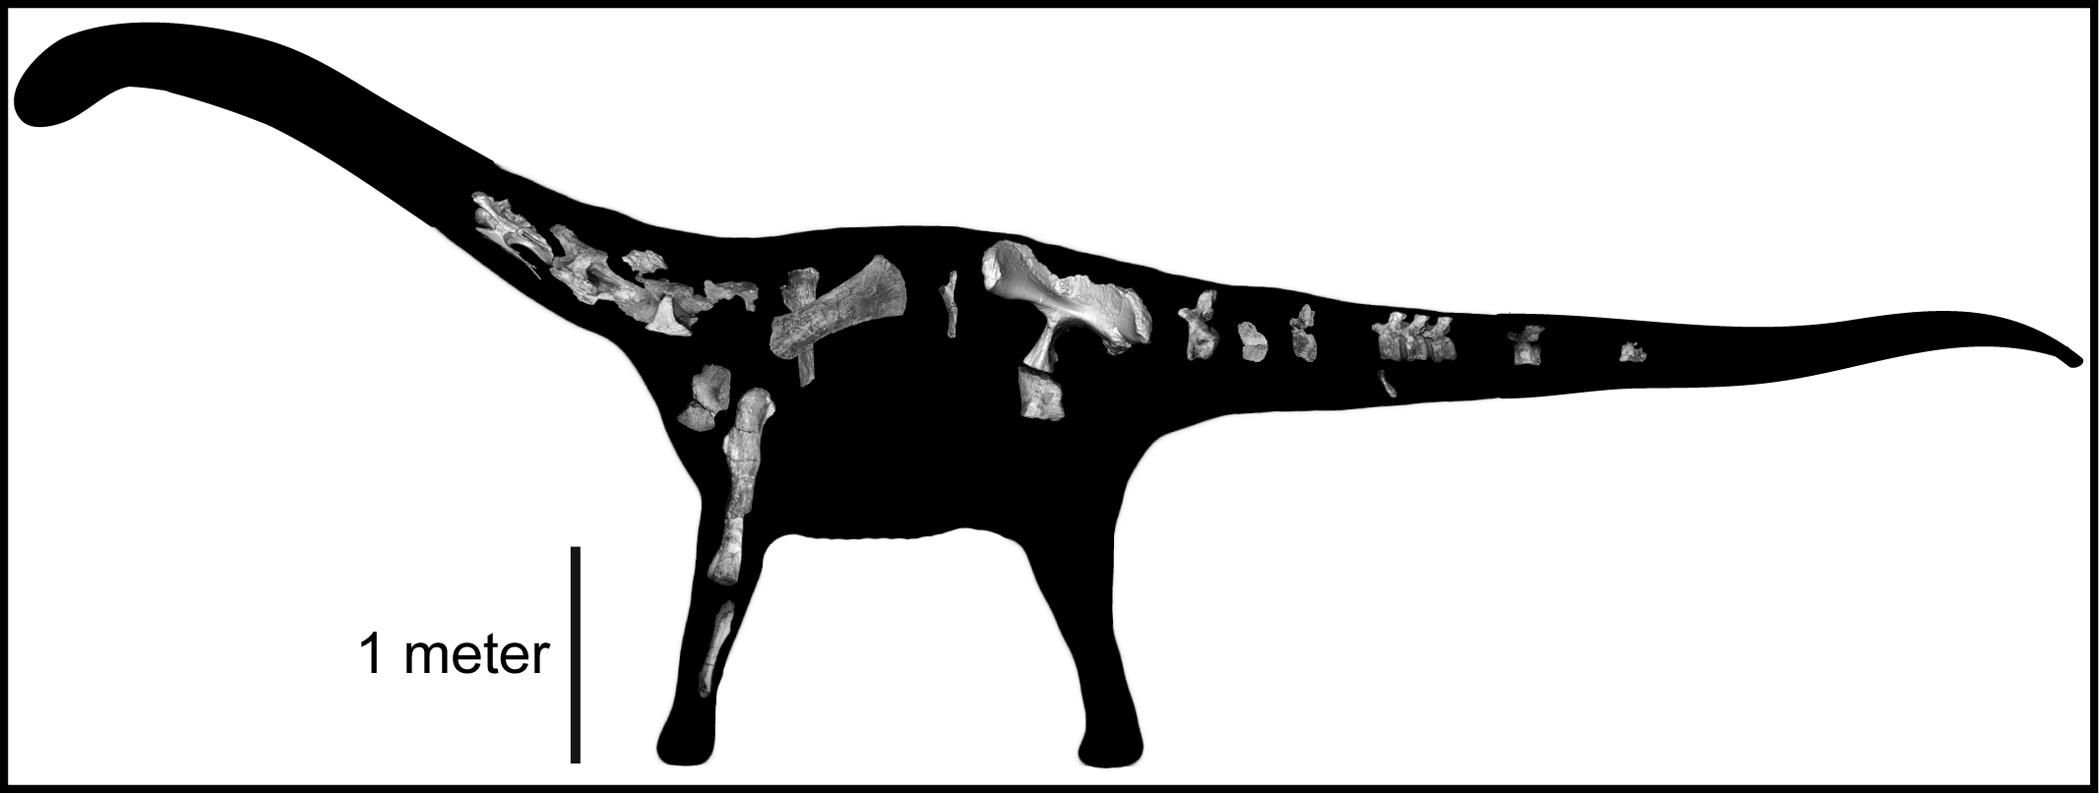 A silhouette of Rukwatitan showing the recovered skeleton and general shape of the titanosaurian.